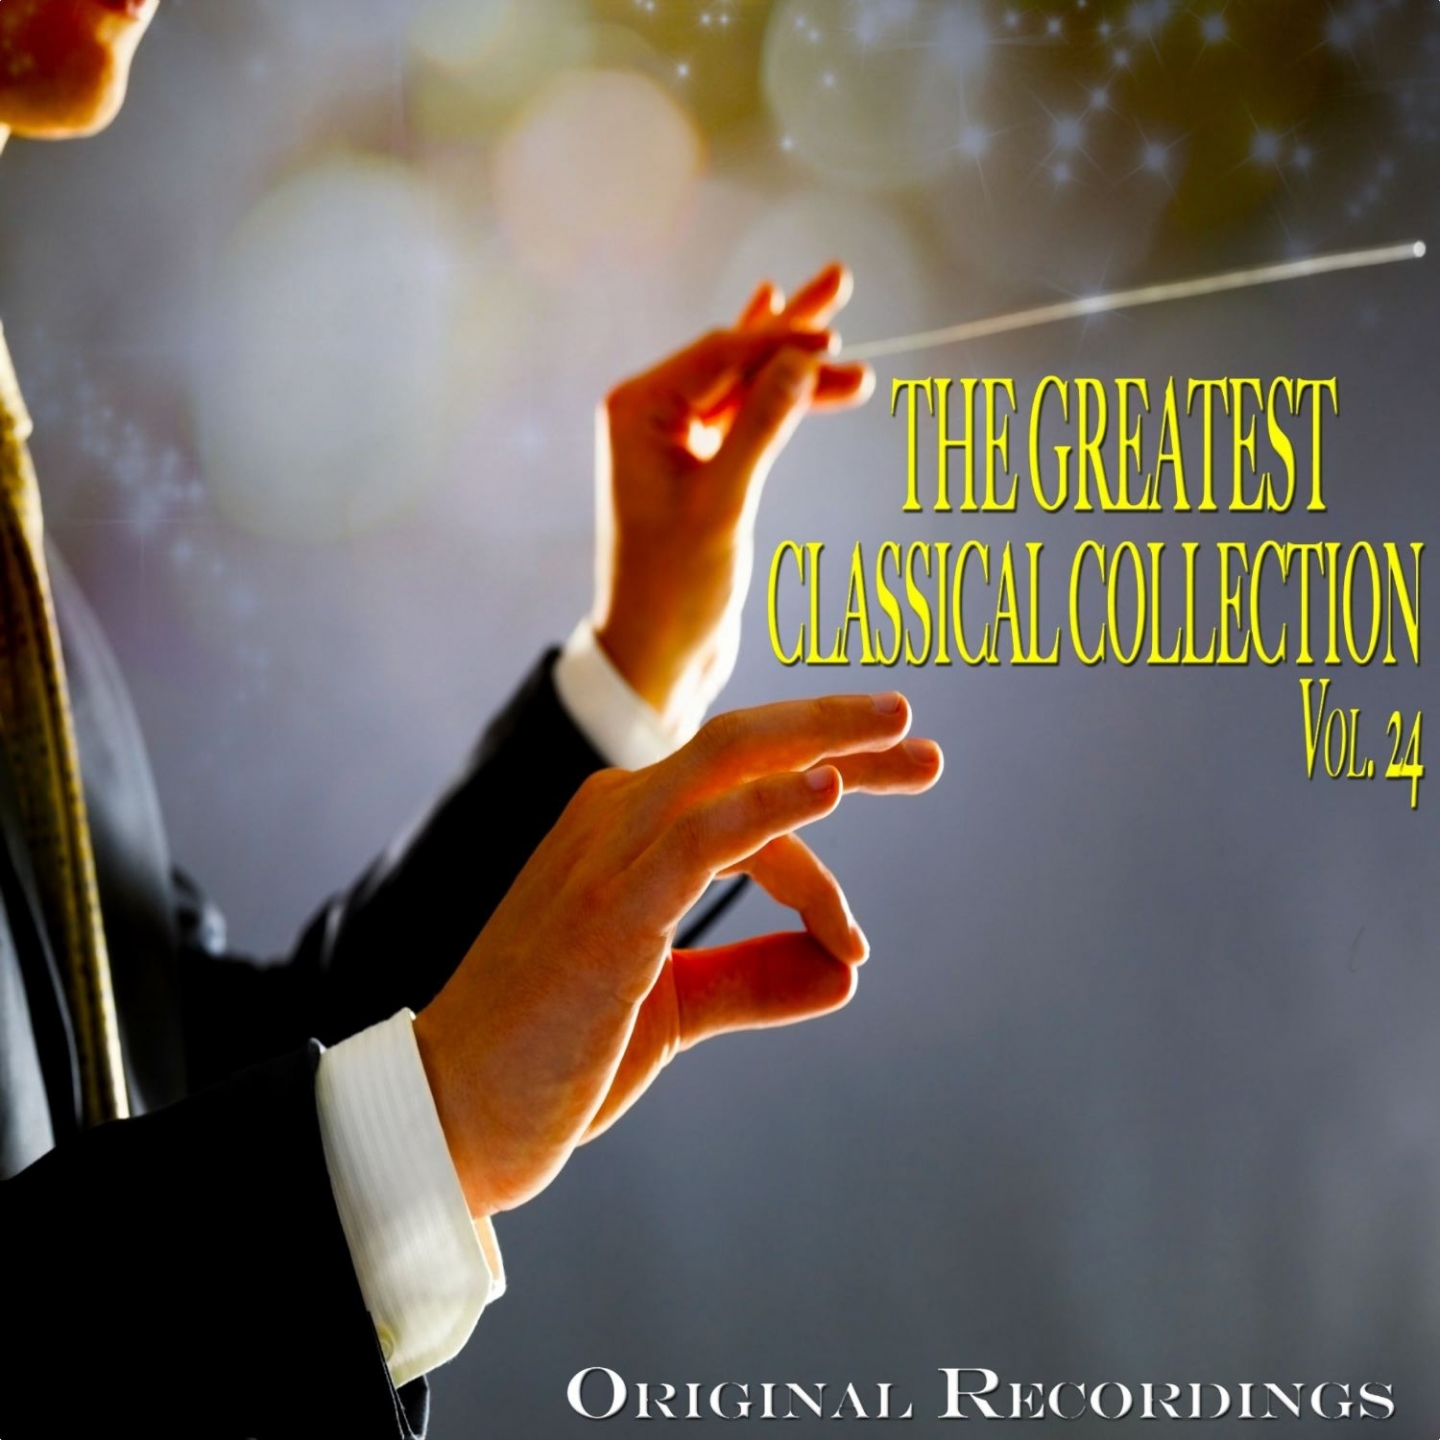 The Greatest Classical Collection Vol. 24